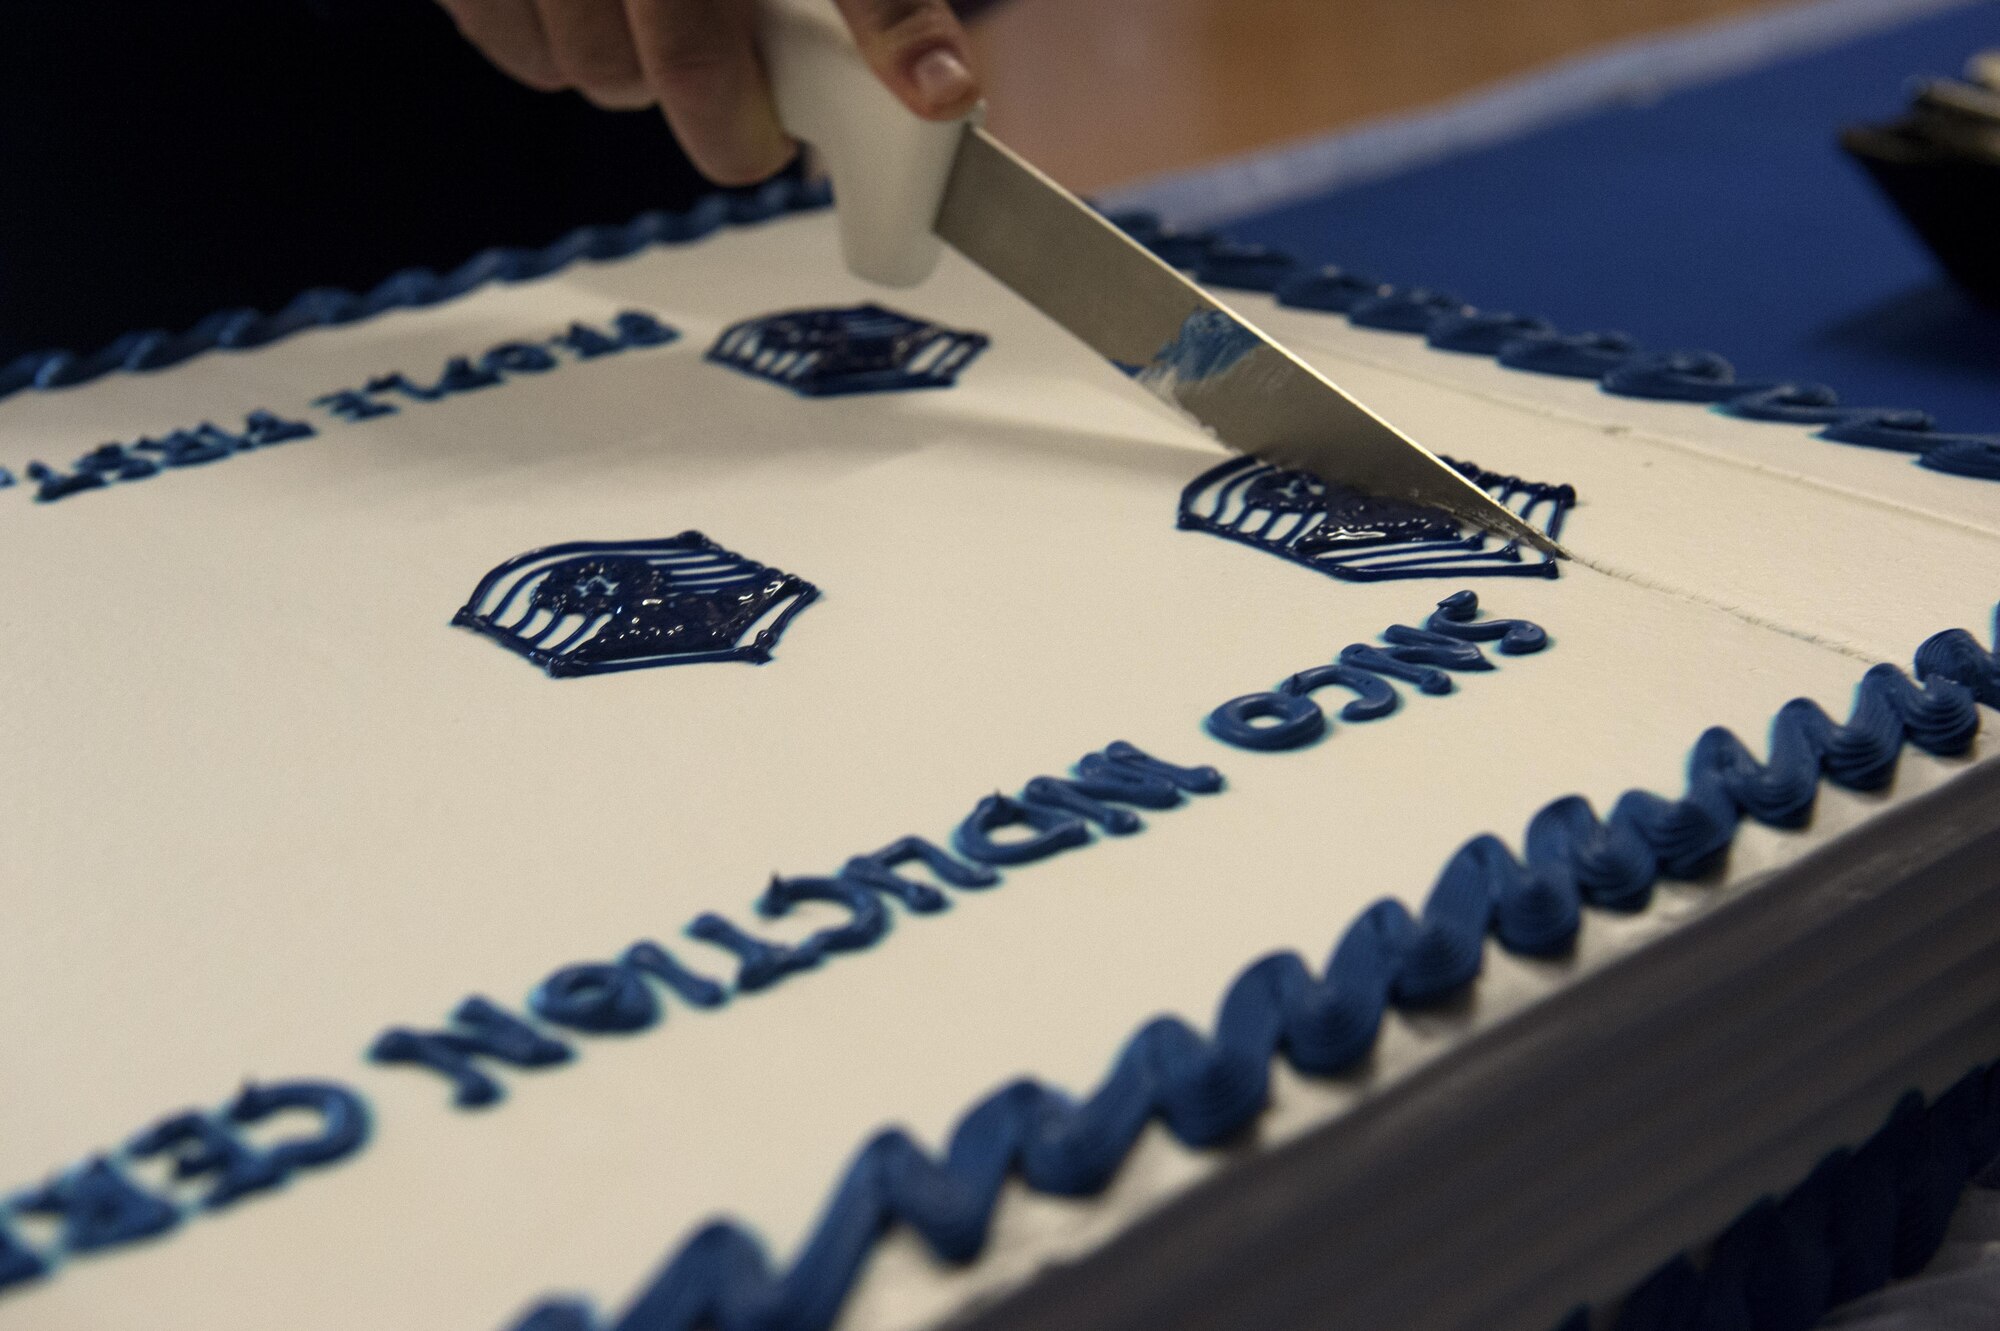 U.S Air Force Senior Master Sgt. John Agnew, 52nd Civil Engineer Squadron facility systems superintendent, cuts a cake during a senior NCO induction ceremony at Club Eifel on Spangdahlem Air Base, Germany, Aug. 12, 2016. The ceremony featured the recognition of 50 inductees, a dinner and speeches by 52nd Fighter Wing leaders. (U.S. Air Force photo by Airman 1st Class Preston Cherry/Released)